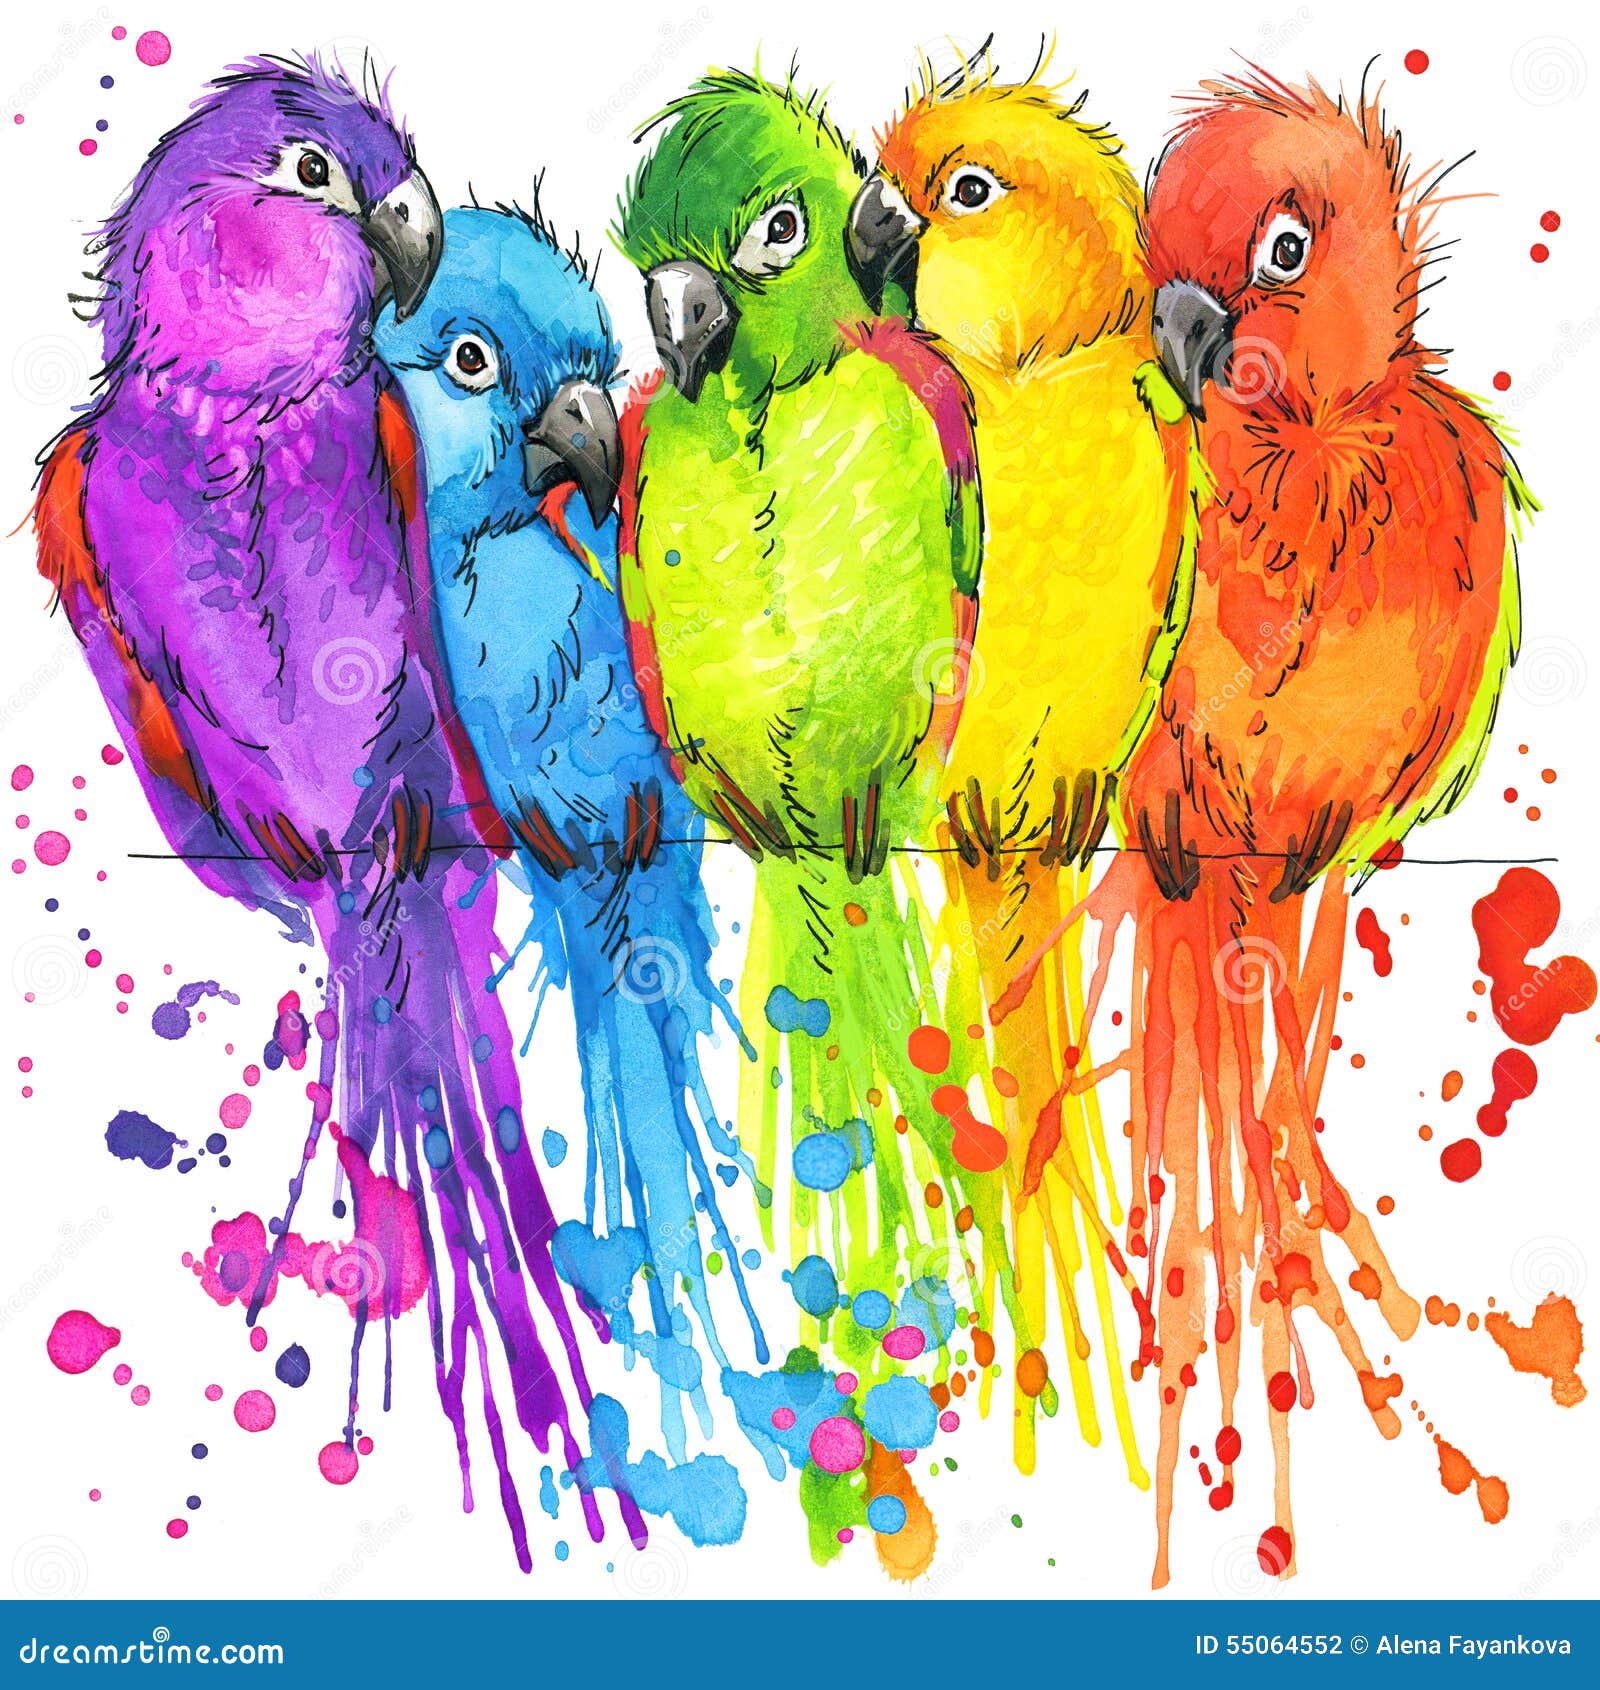 funny colorful parrots with watercolor splash textured